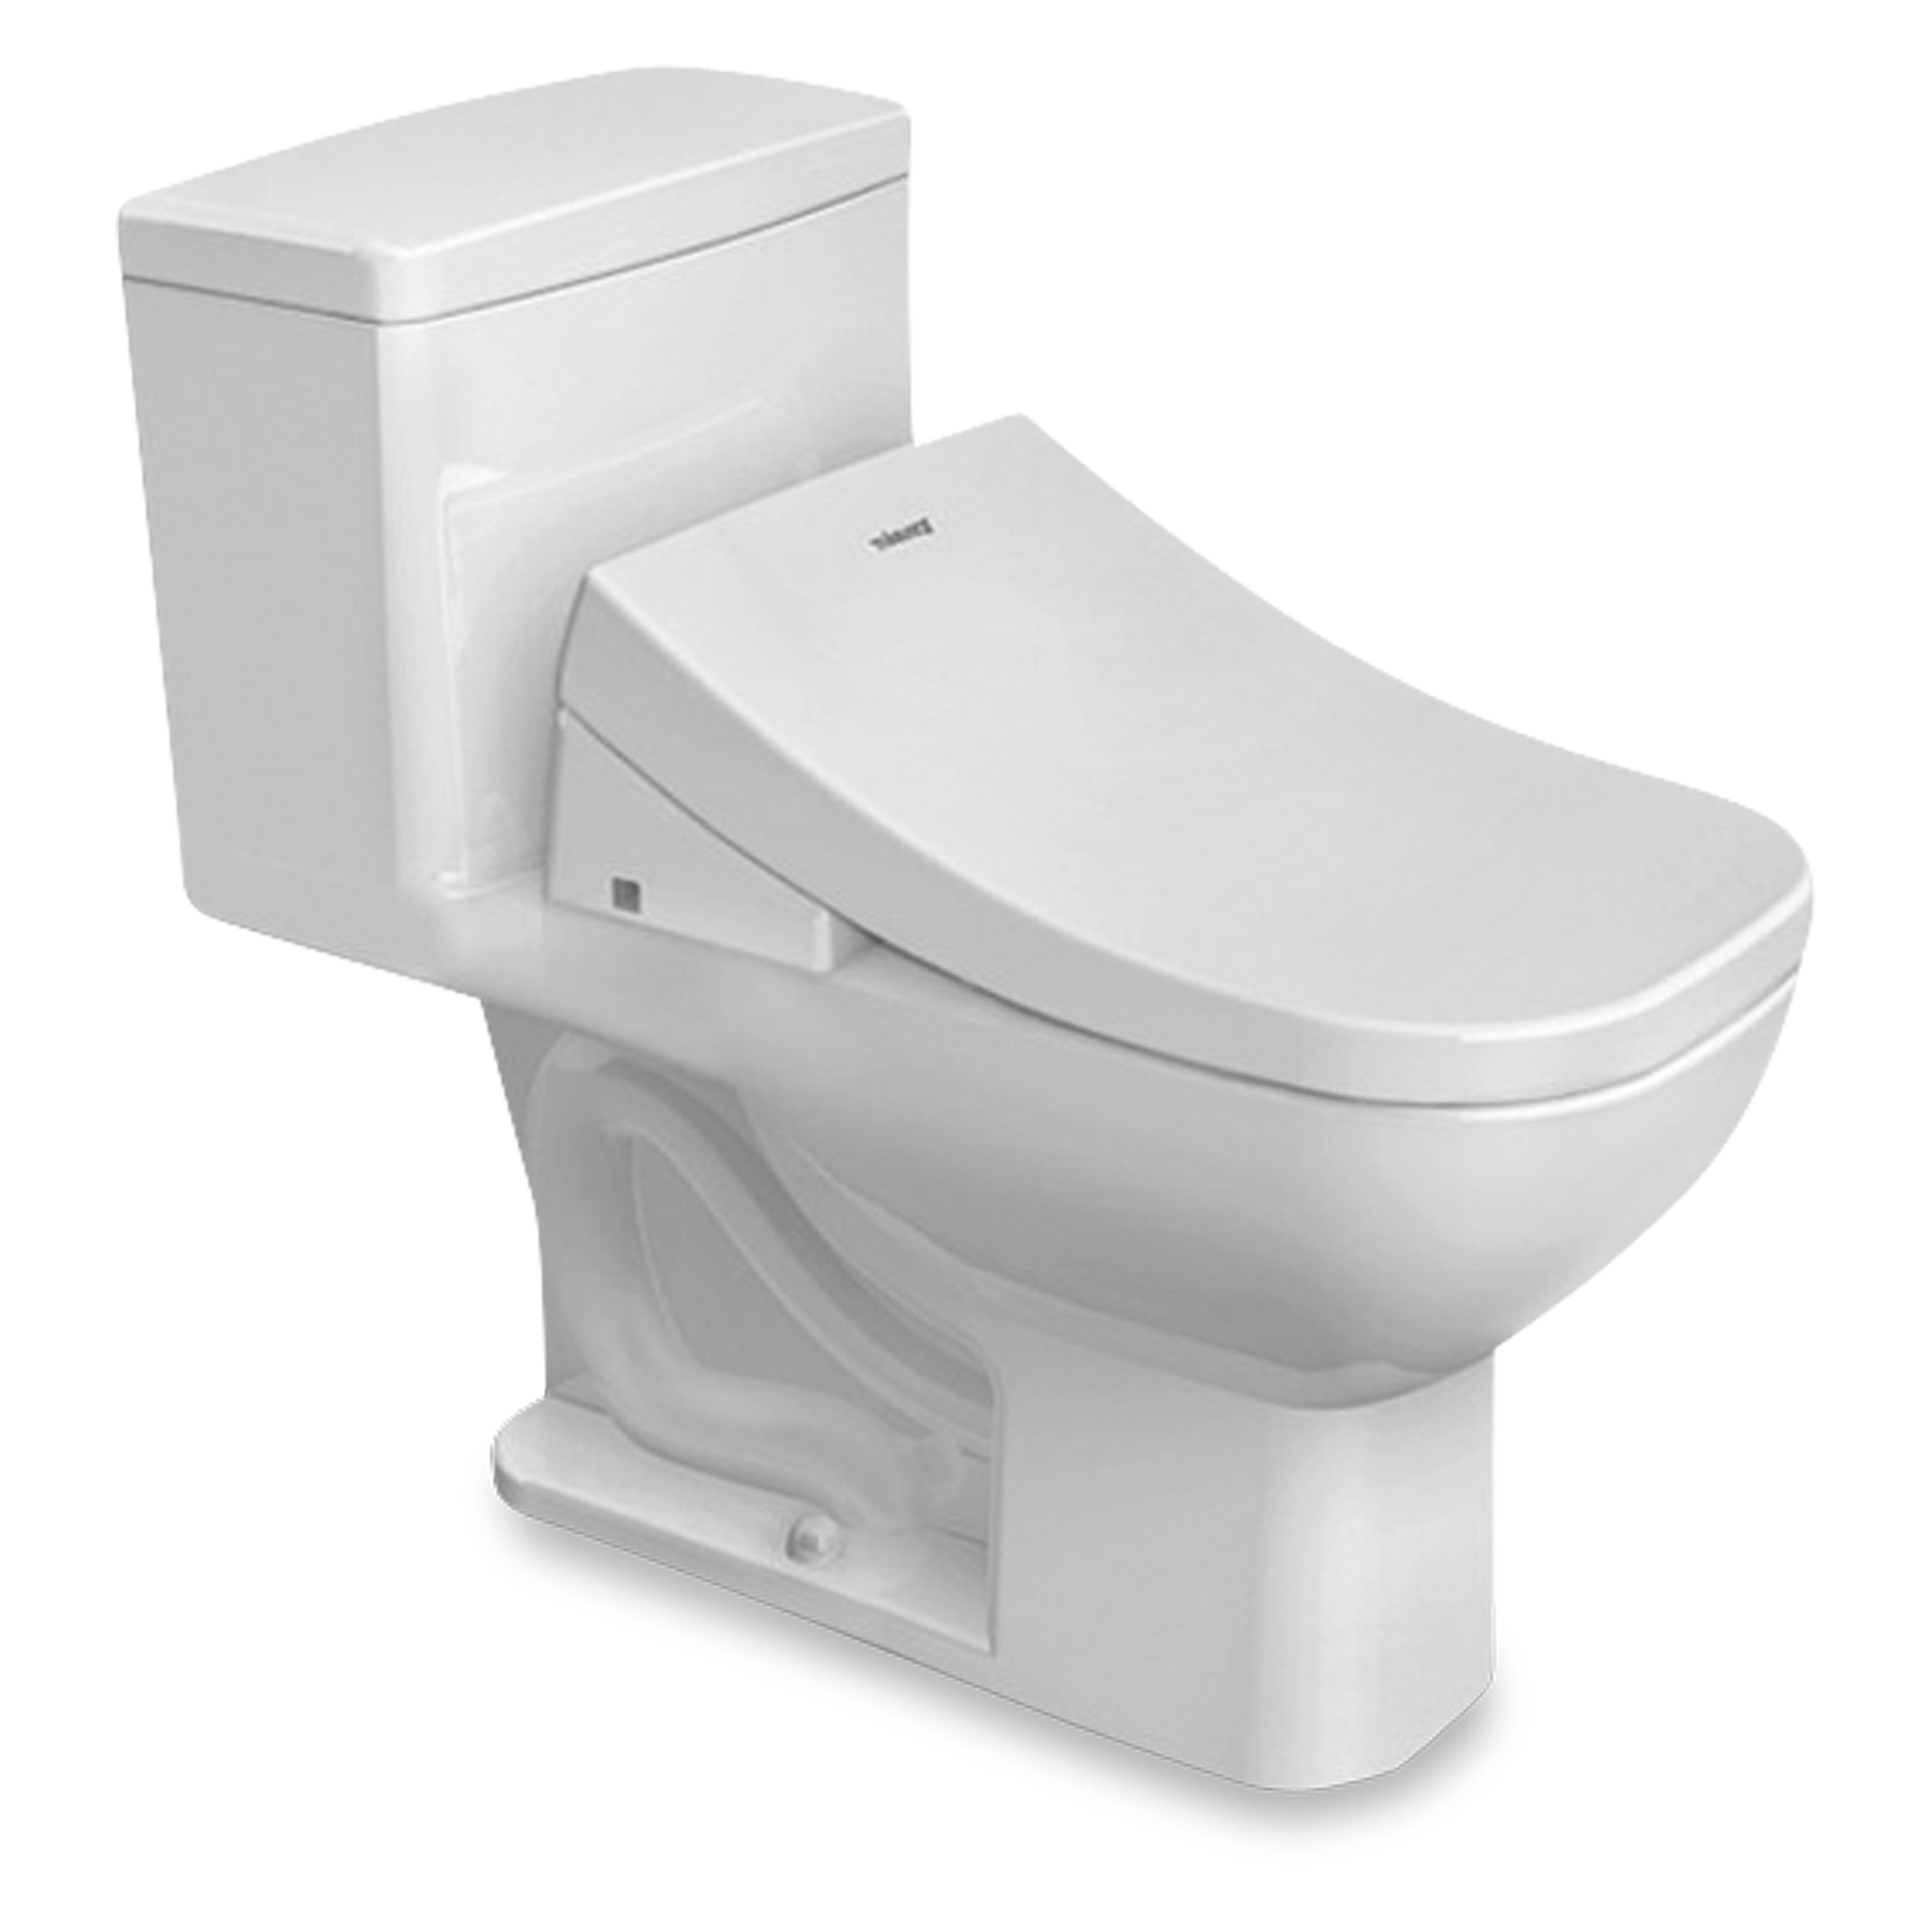 A sleek, white, one-piece toilet with an elongated seat and a Universal-height bowl.